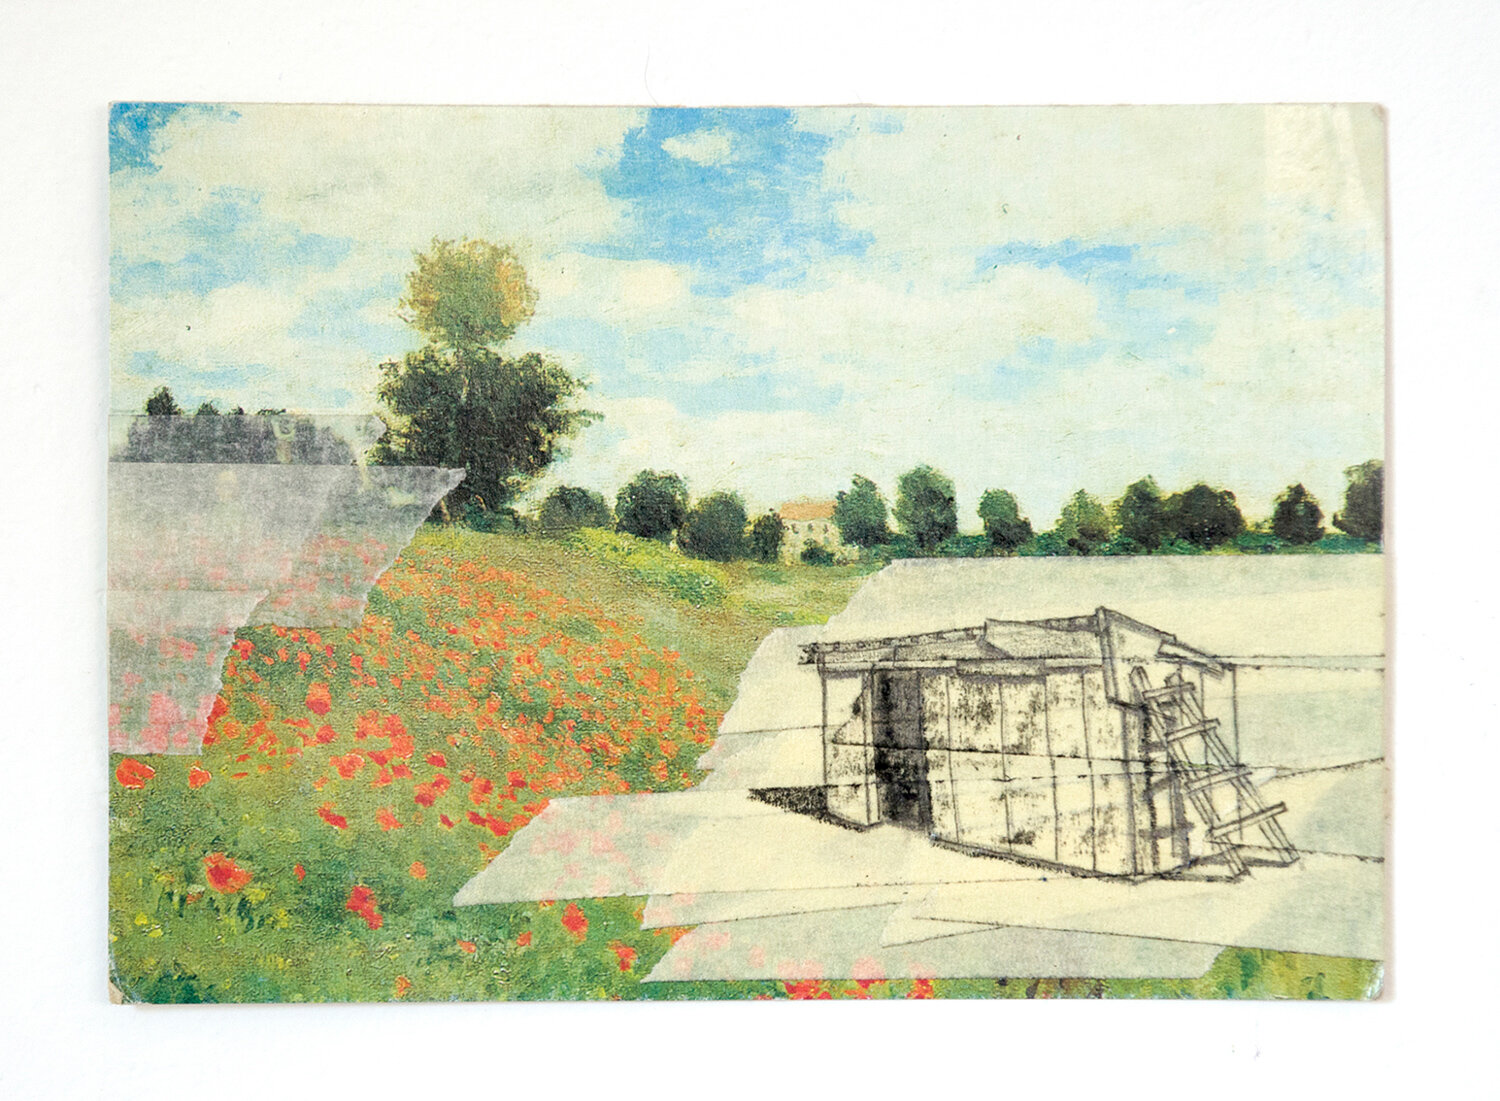 The redemption of Klod Monet’s puppy field (1873), Maskingtape and Charcoal on a postcard, 2019